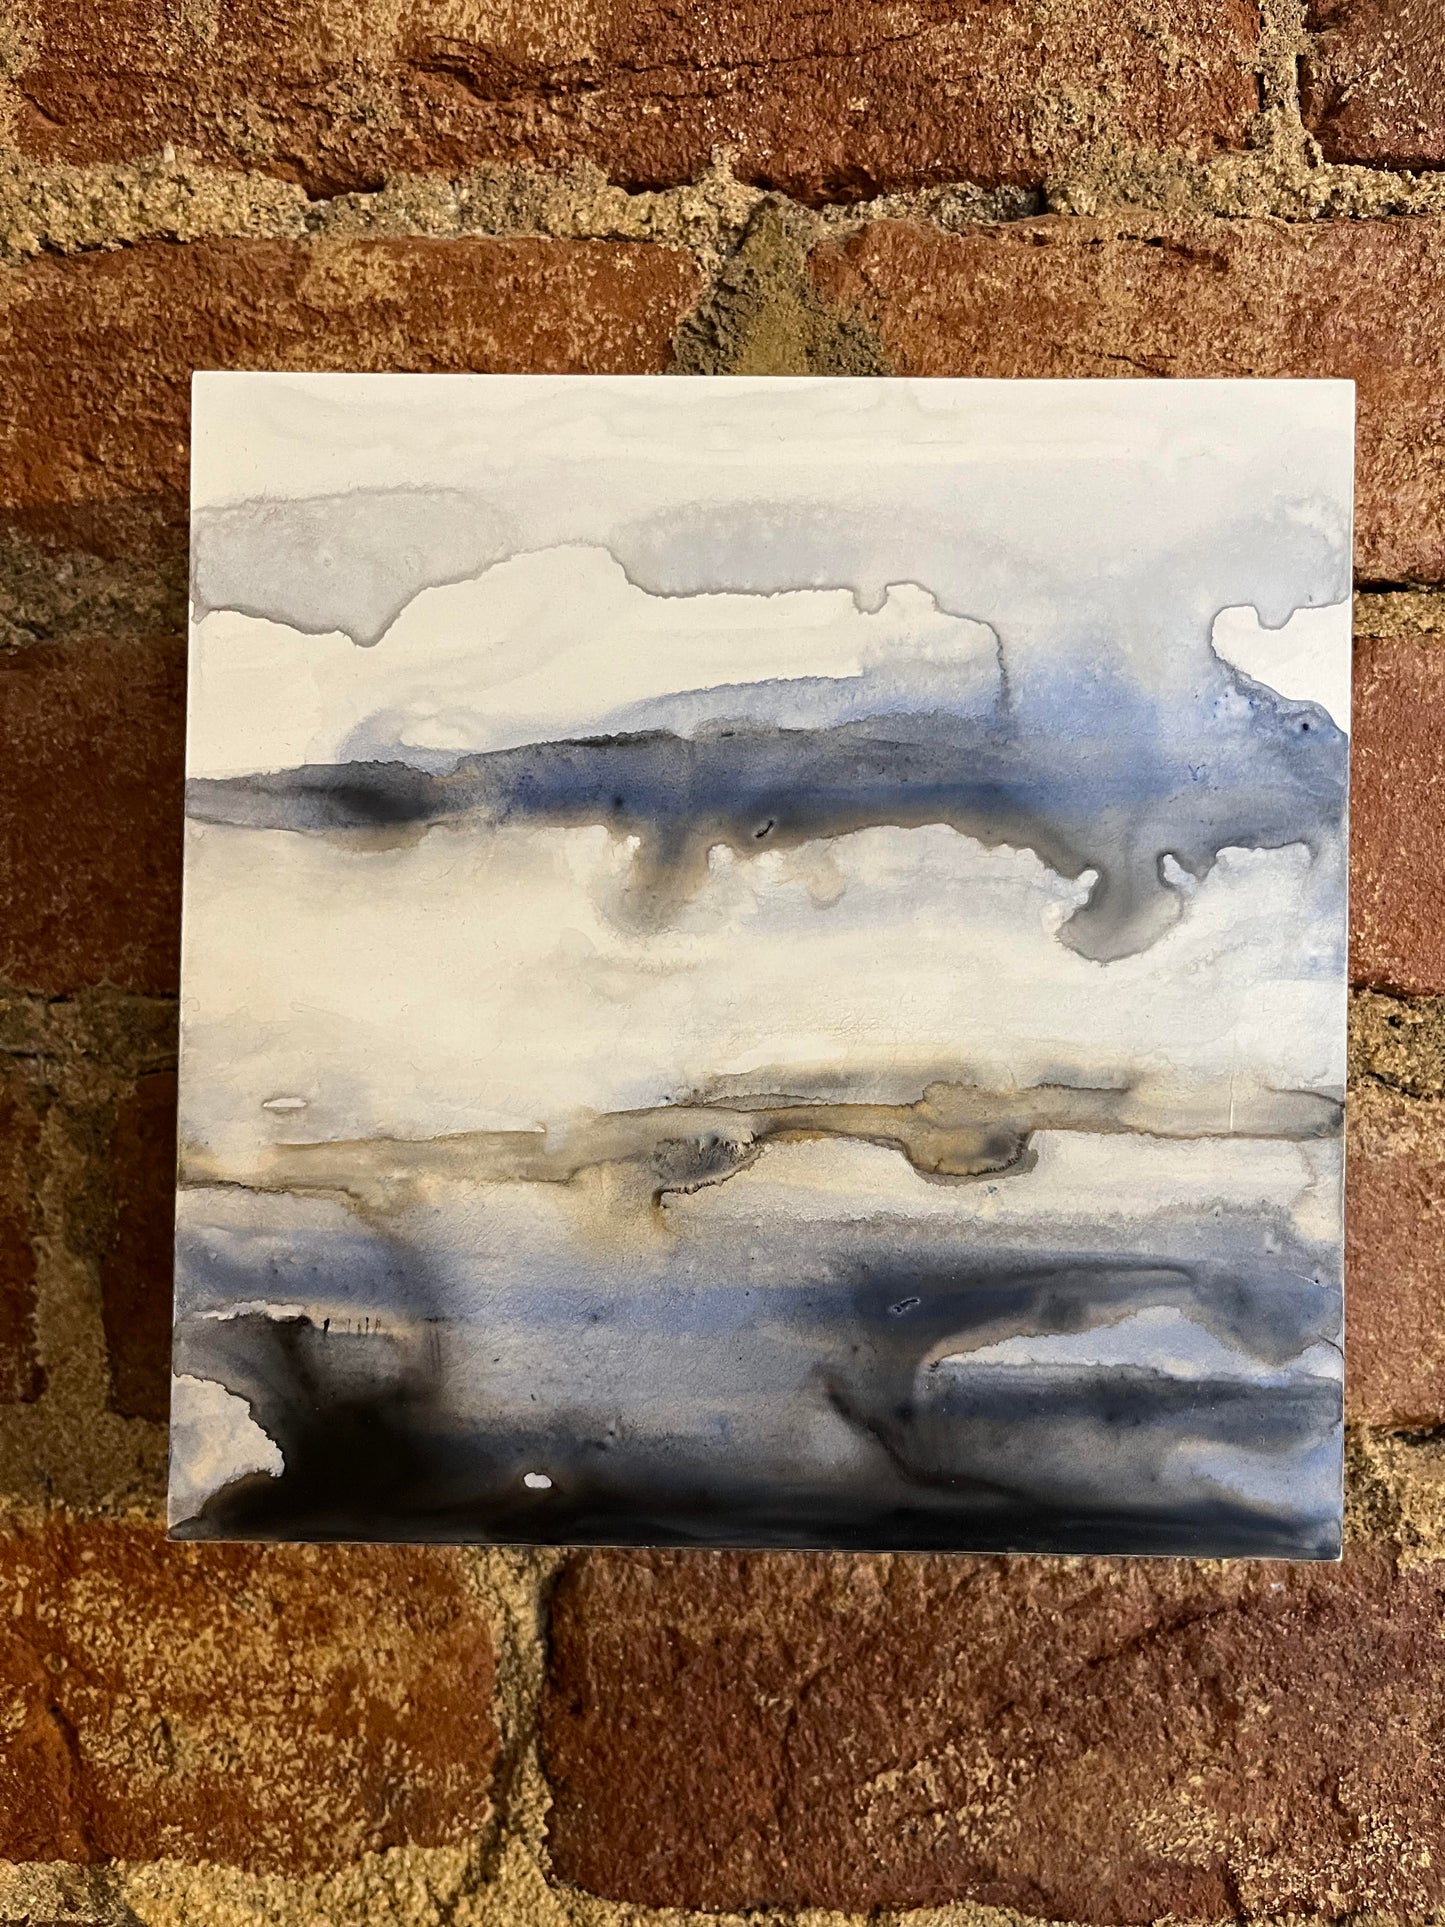 Stormy or Stony? - 6" x 6" x 1.5" - Watercolor on Clayboard Cradled Panel